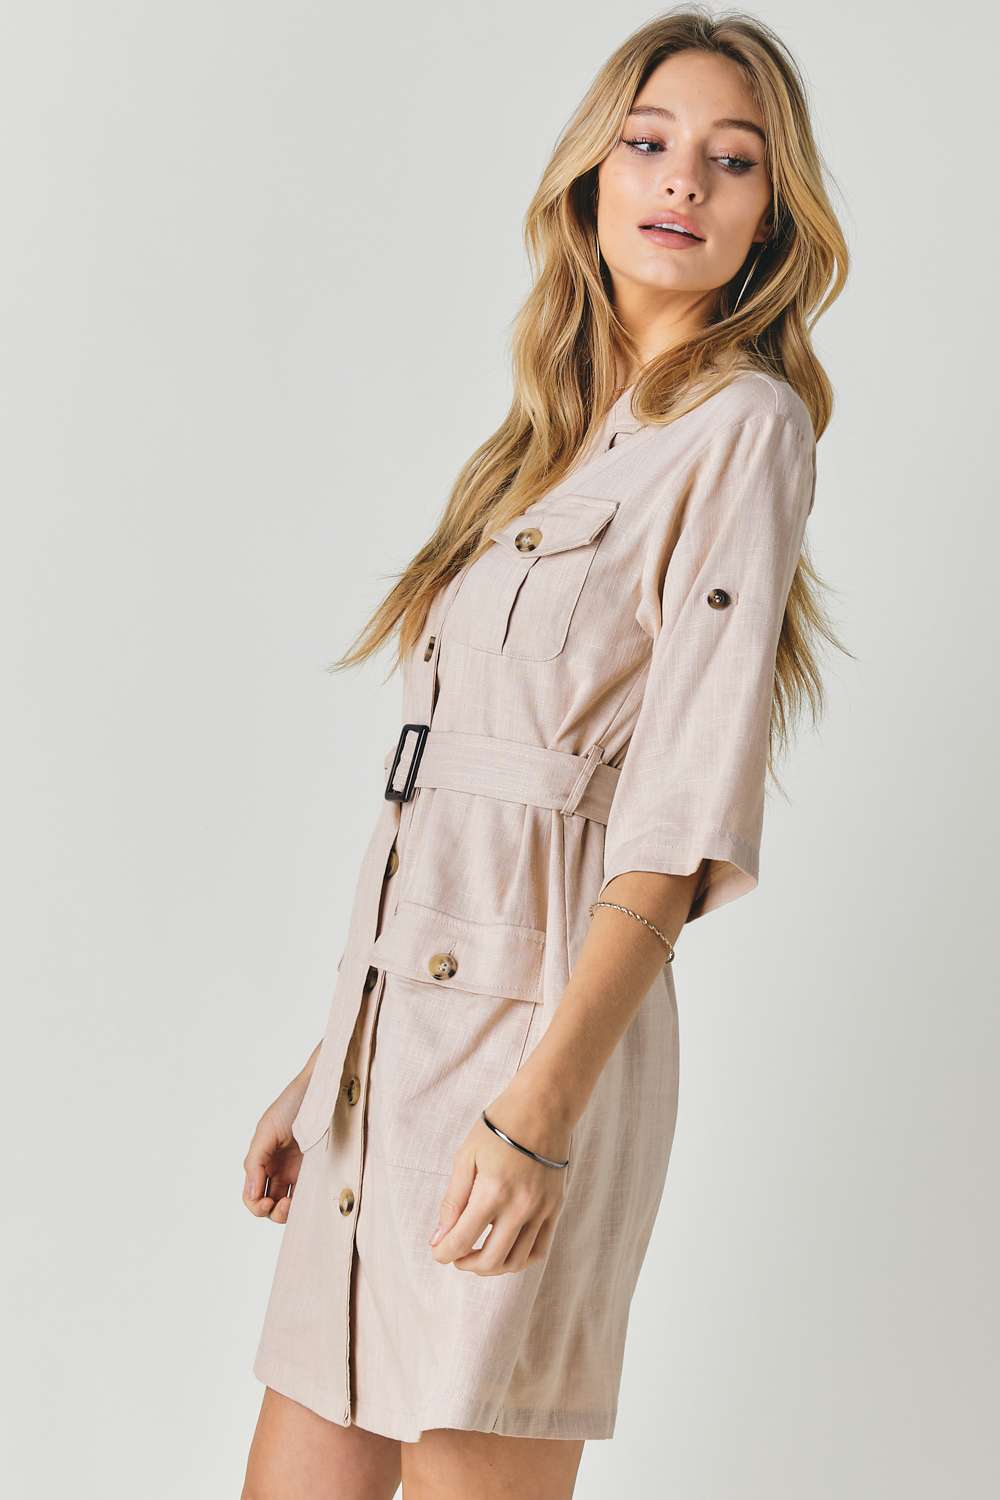 Drop Shoulder With Saist Tie Belted Dress Sunny EvE Fashion